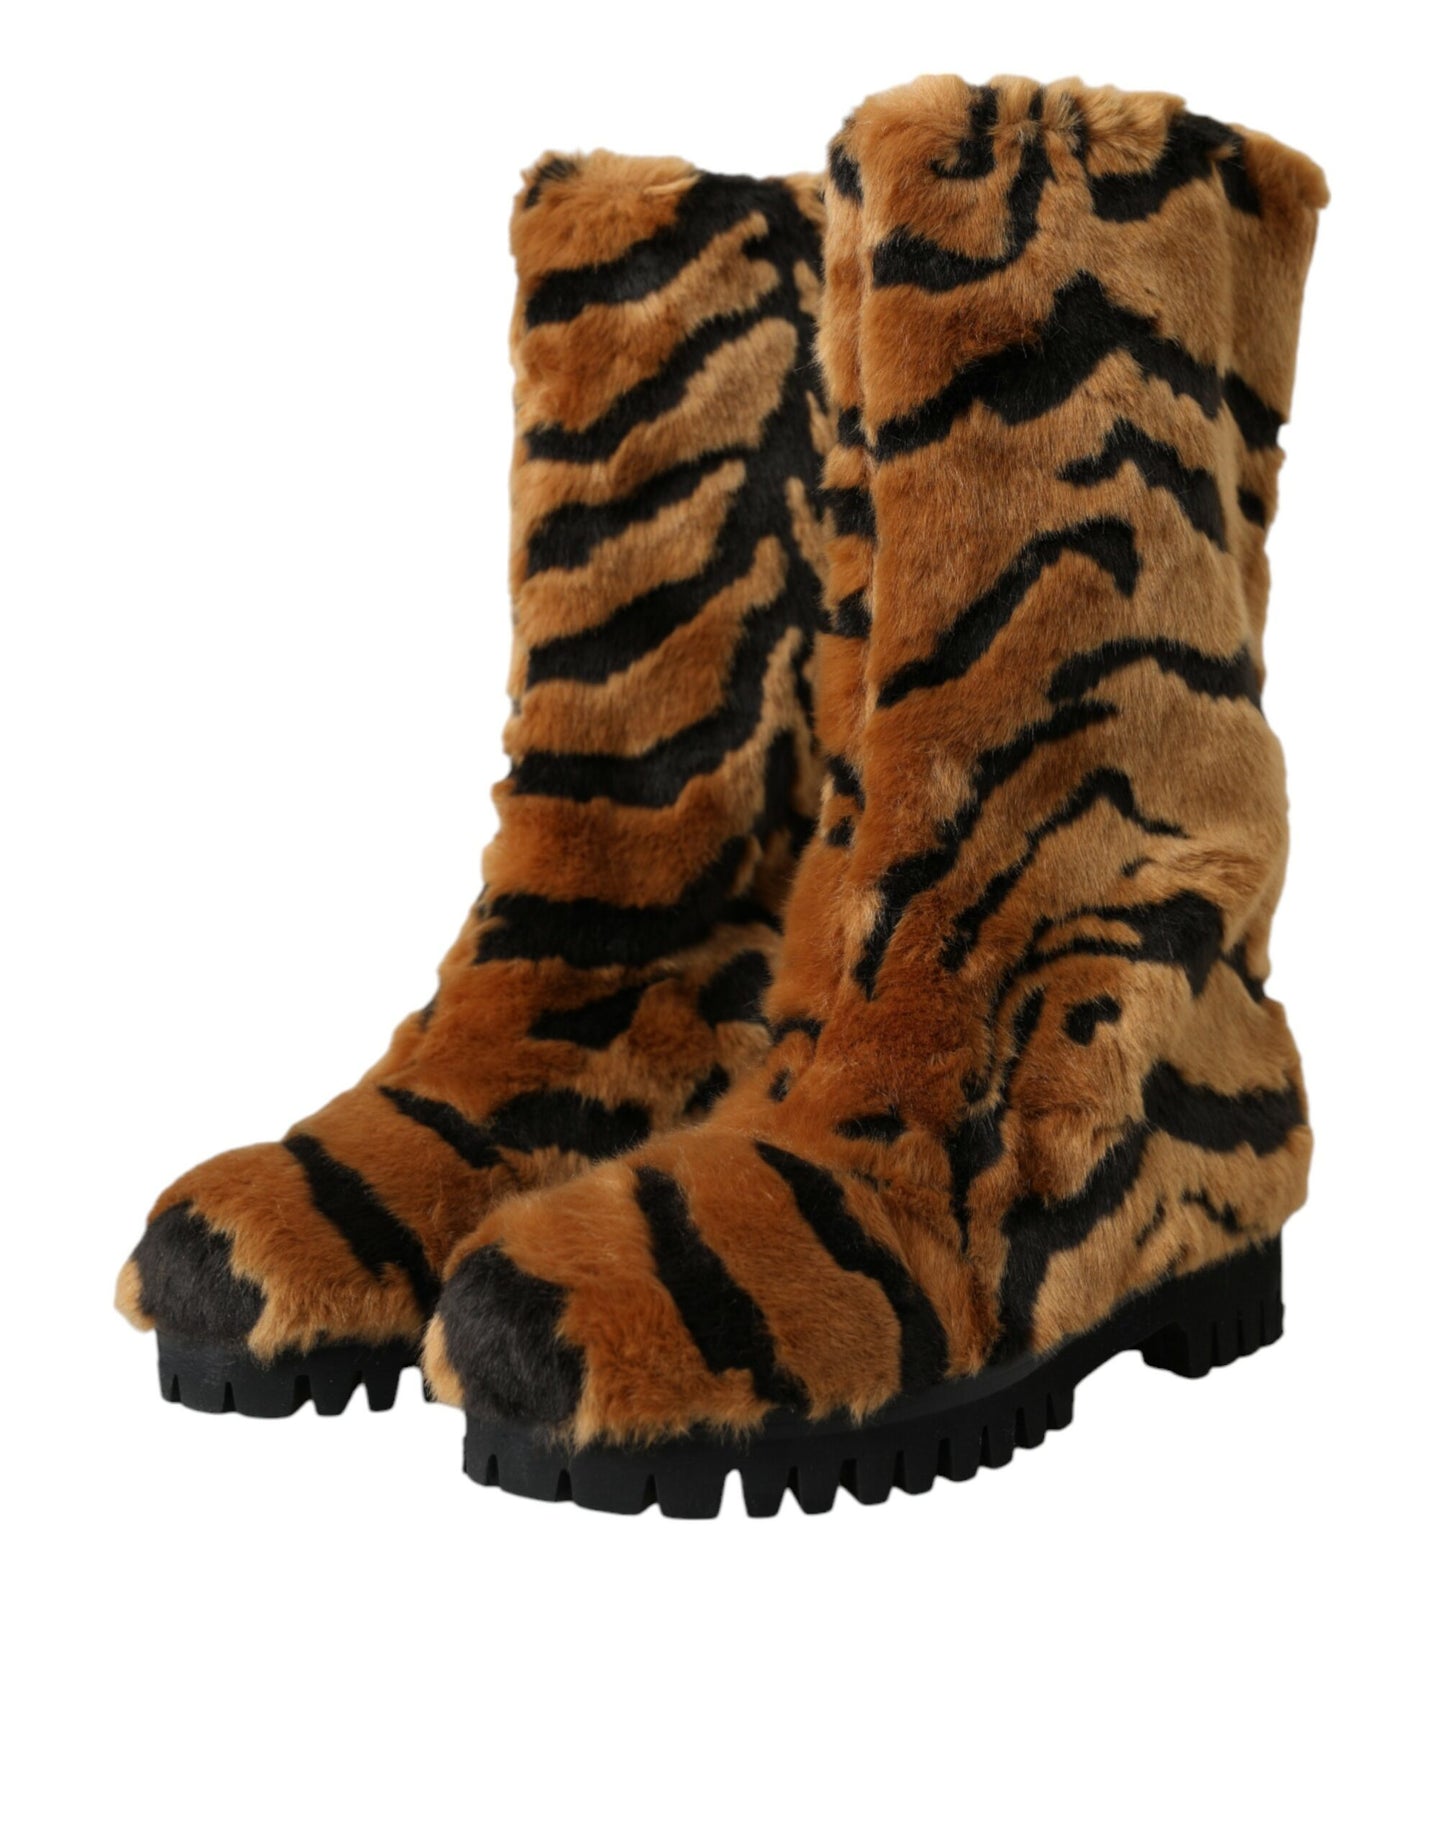 Dolce & Gabbana Brown Tiger Fur Leather Mid Calf Boots Shoes